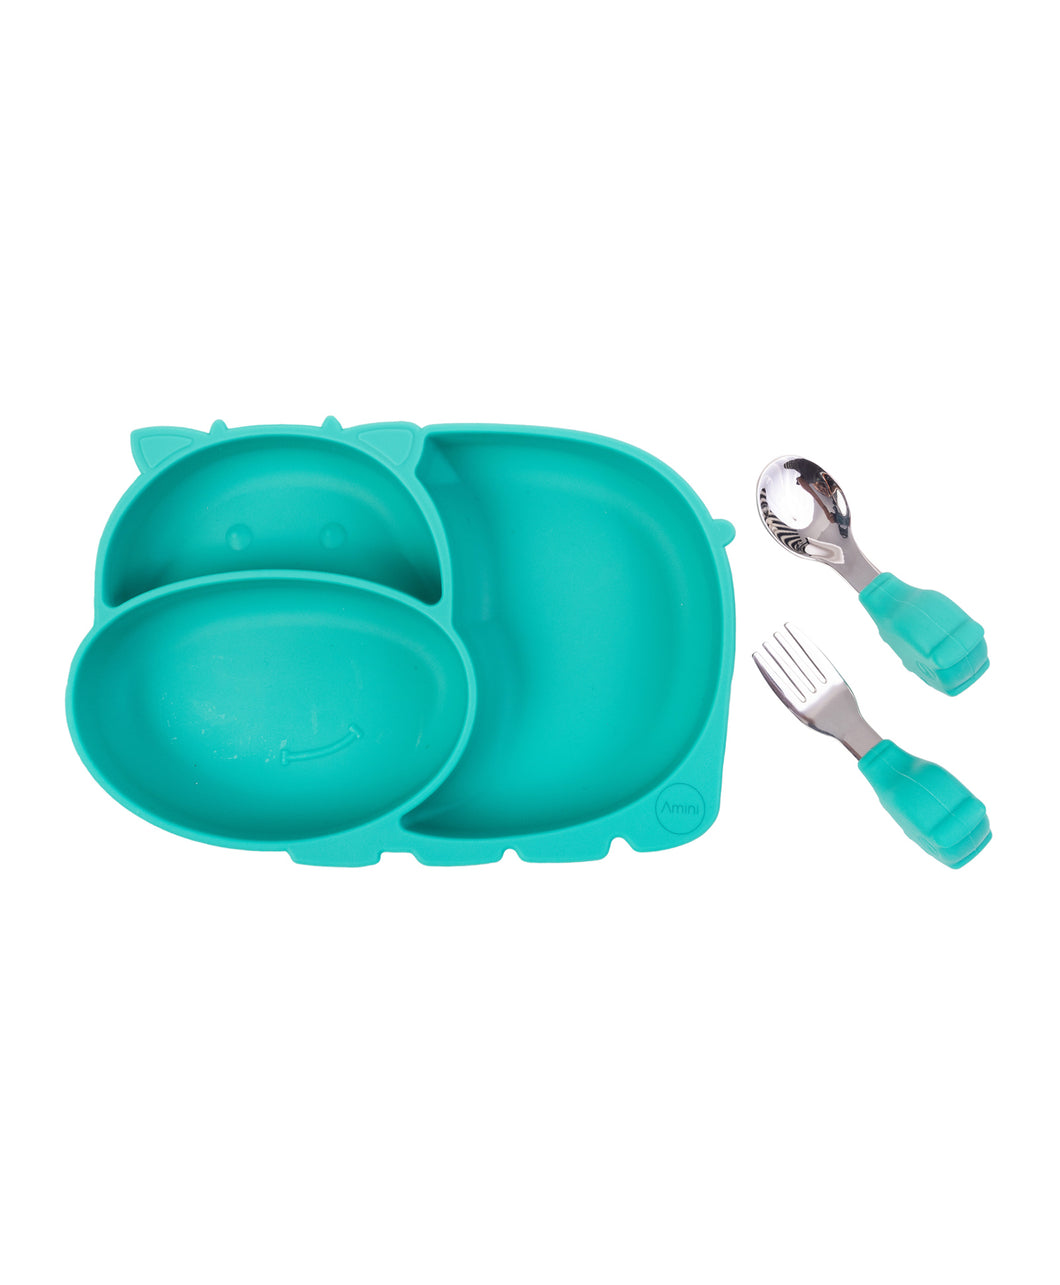 Kids Hippo plate with cutlery set Green by Amini